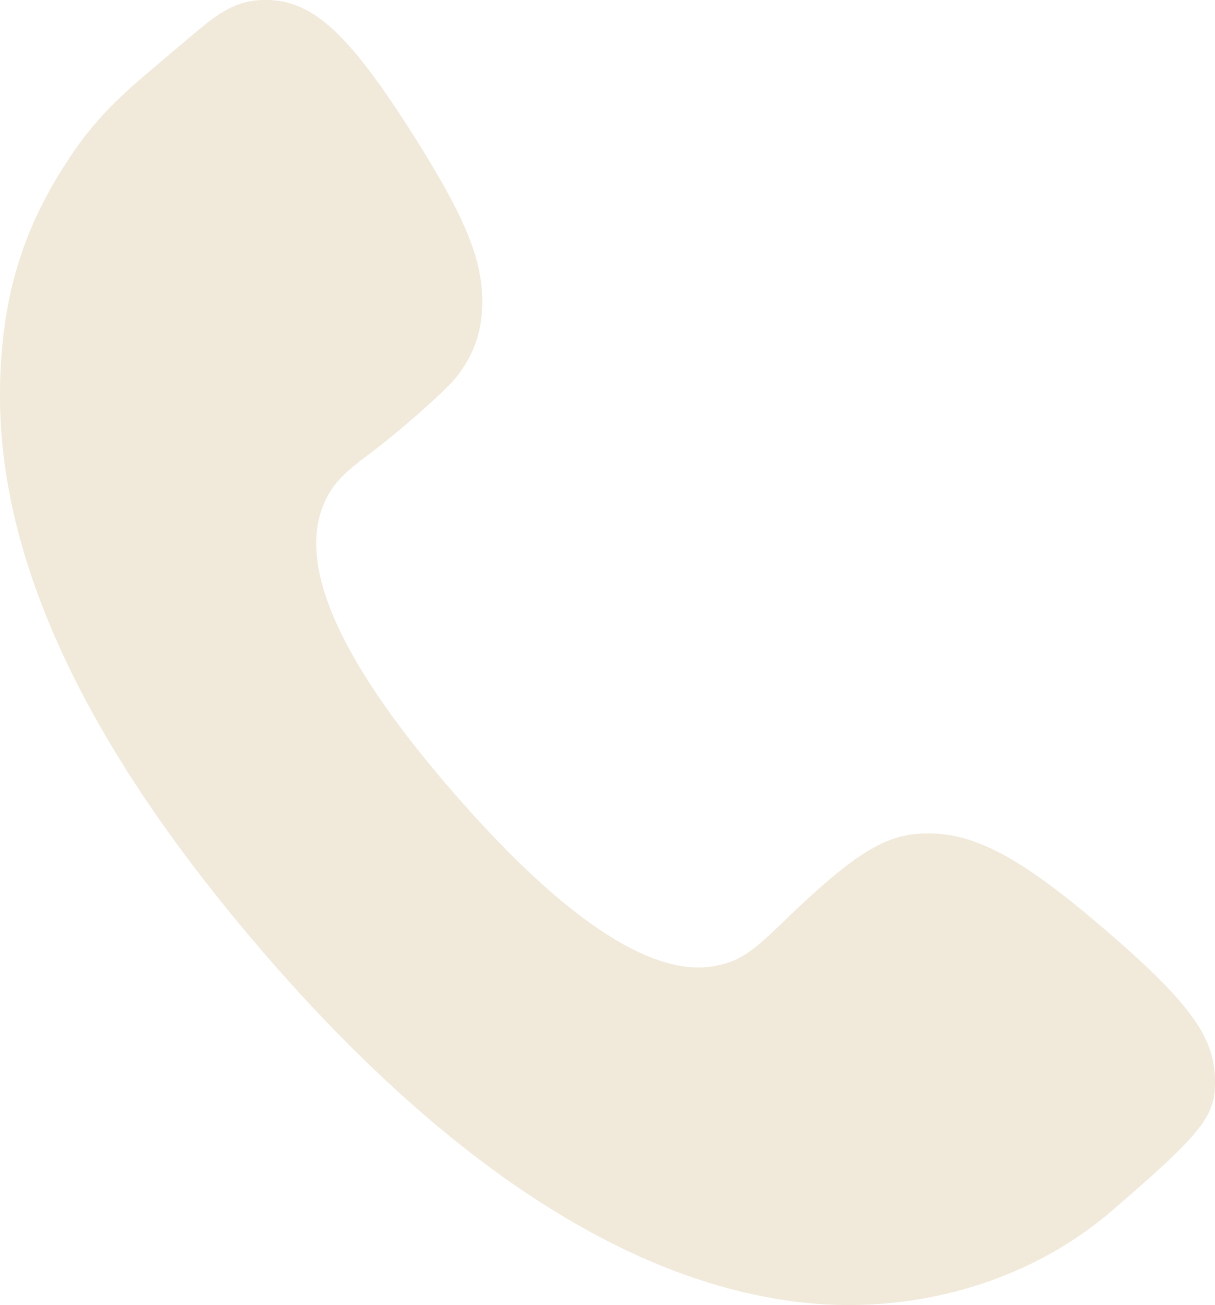 Icon of a phone to call us at [number]